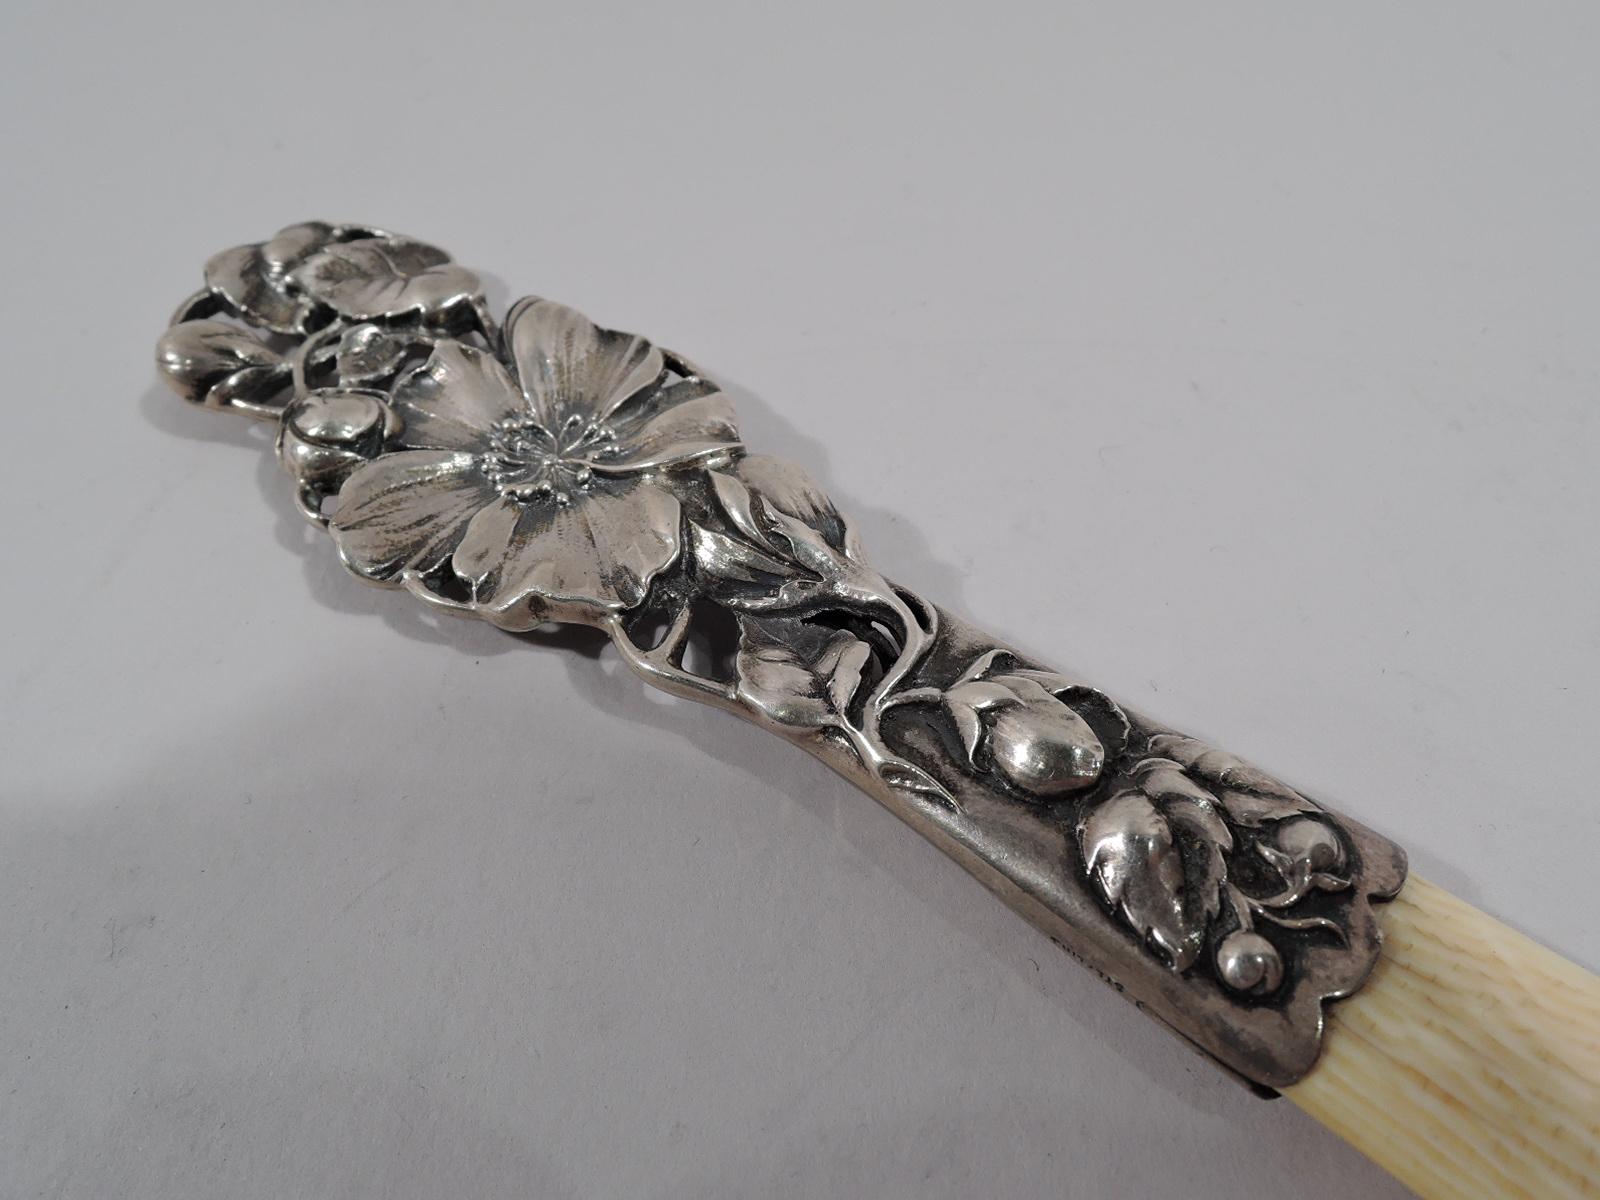 Turn-of-the-century Art Nouveau sterling silver paper knife. double sided sterling silver handle with flower heads and buds entwined and overlapping open scrollwork. Blade flat with pointed tip. Marked “Sterling” and numbered B1830.